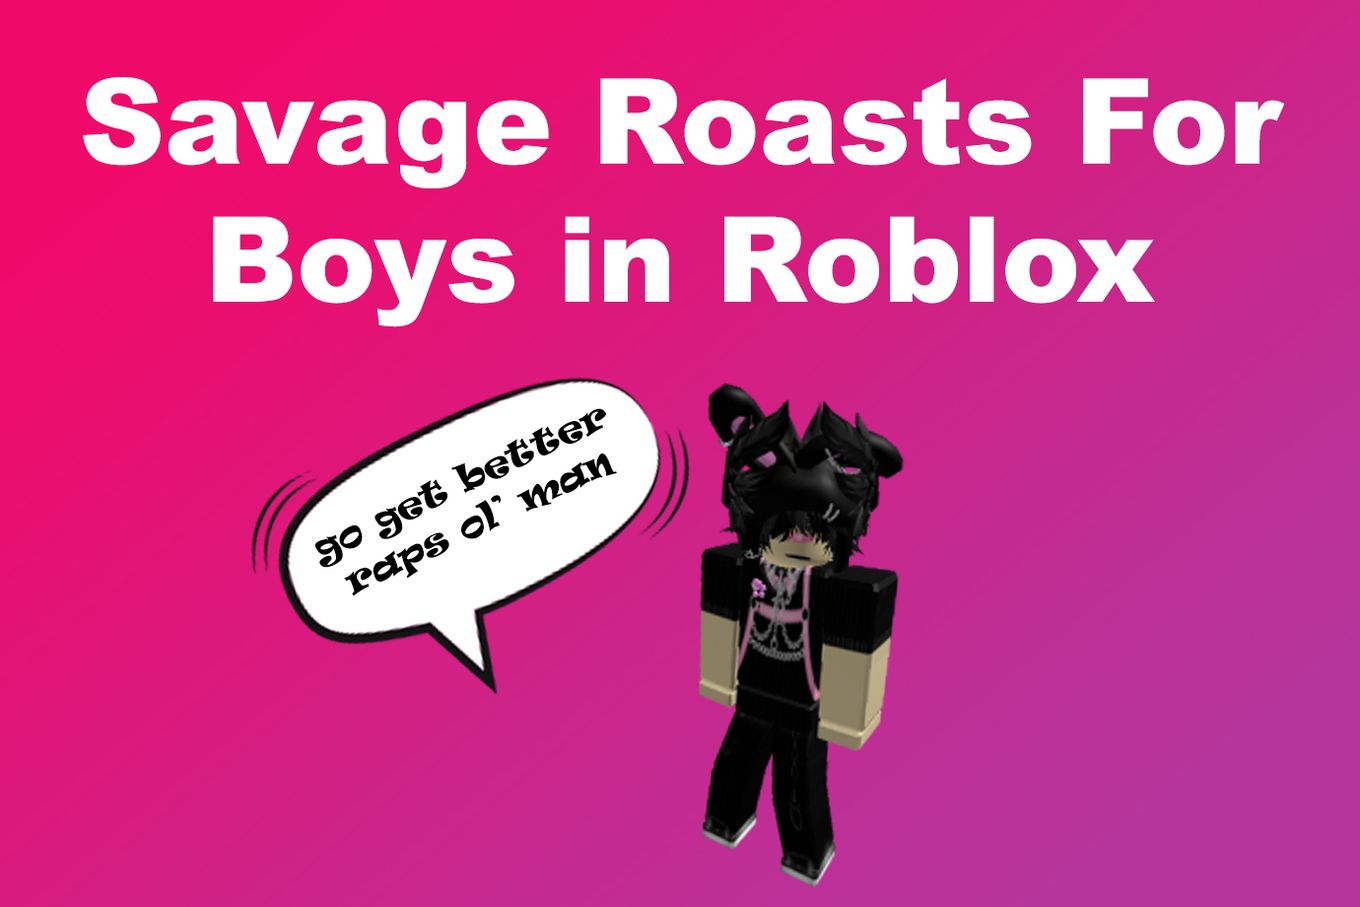 Savage Roasts For Boys in Roblox